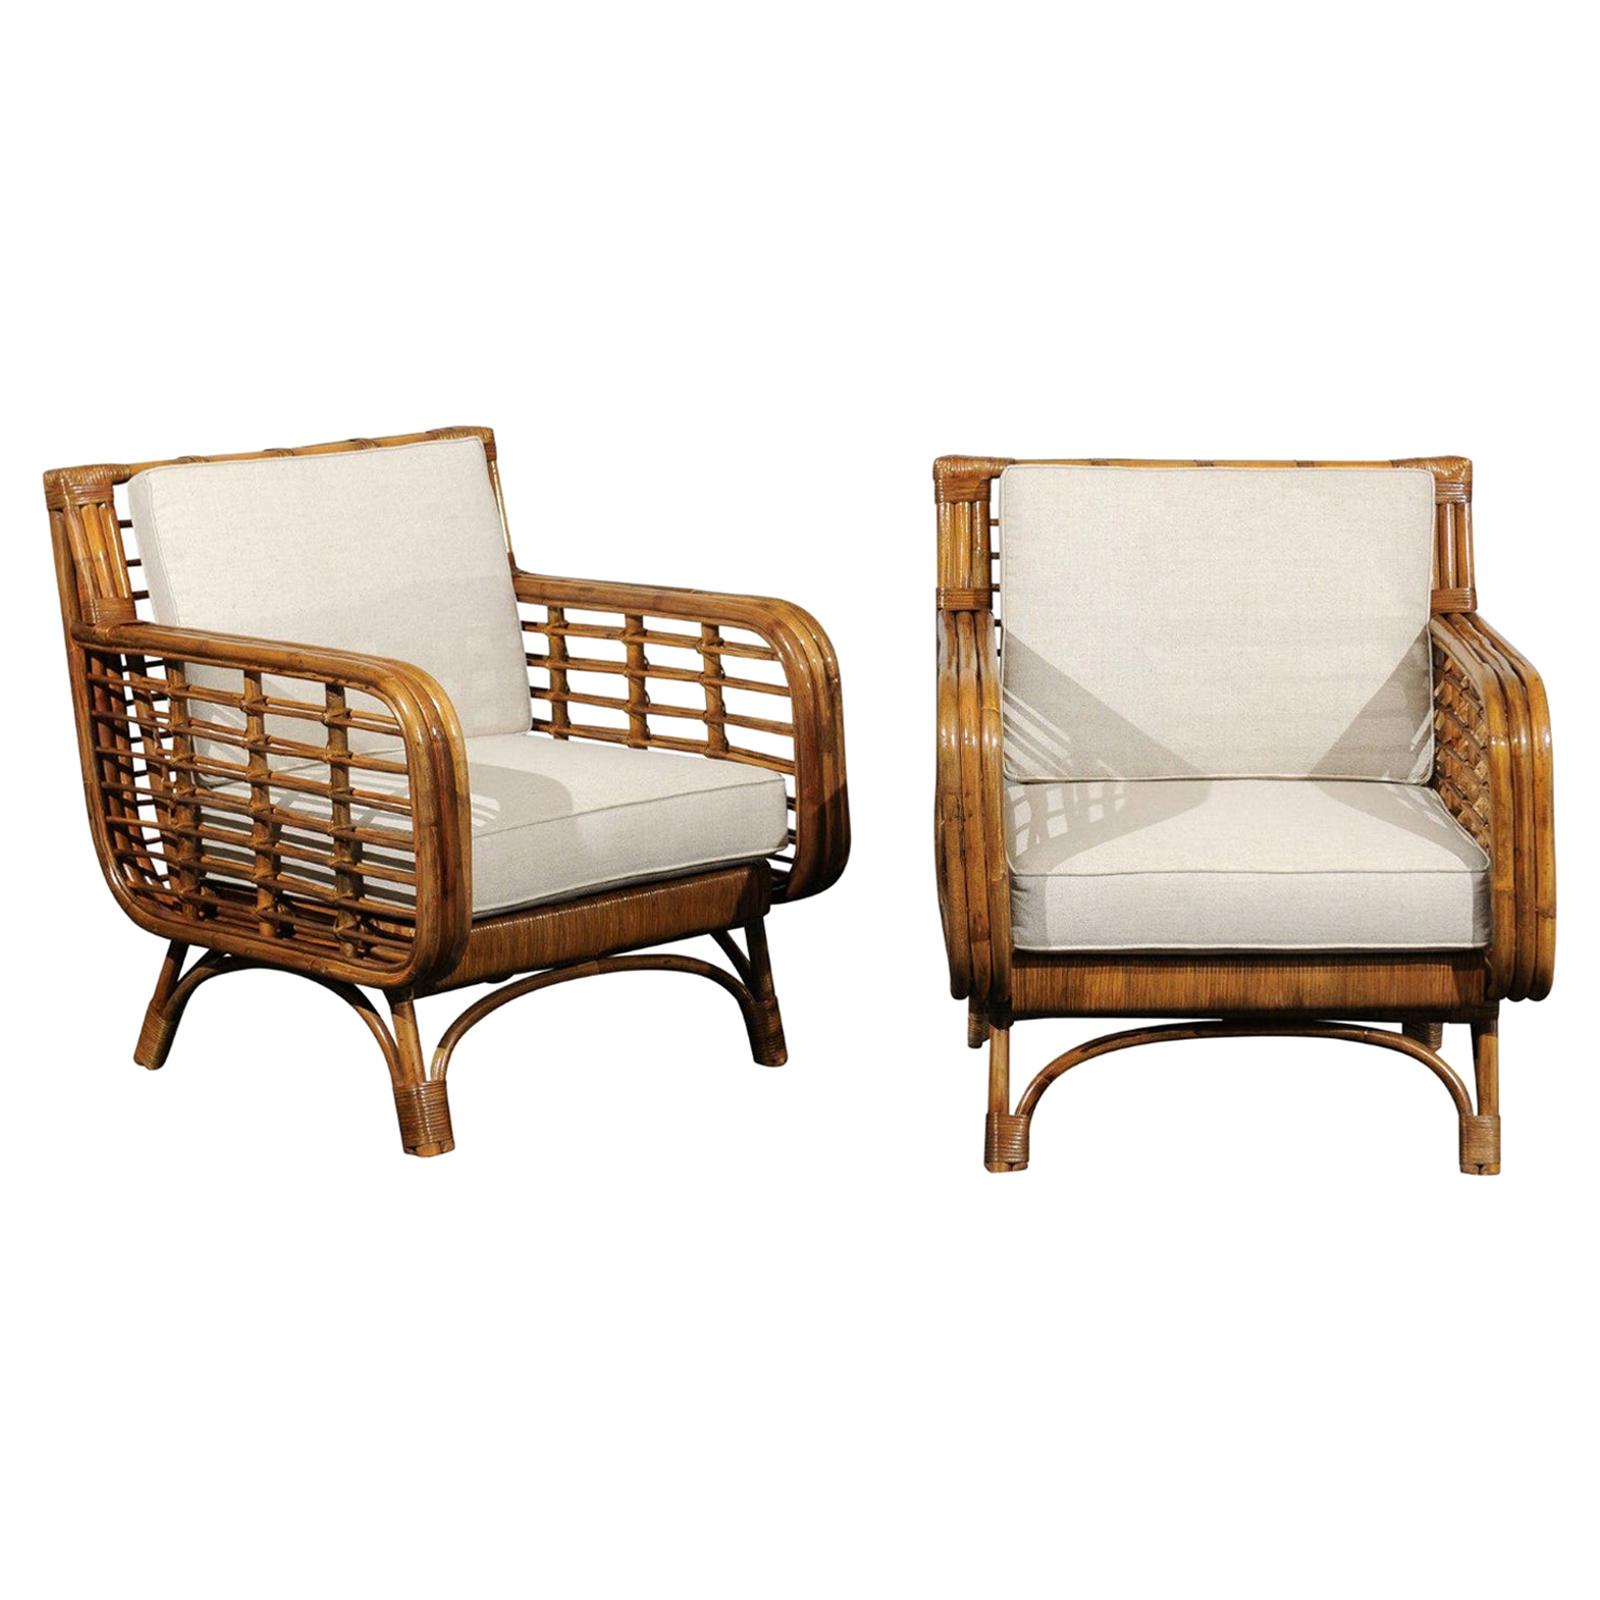 Set of 4 Fabulous Restored Birdcage Style Rattan and Cane Loungers, circa 1955